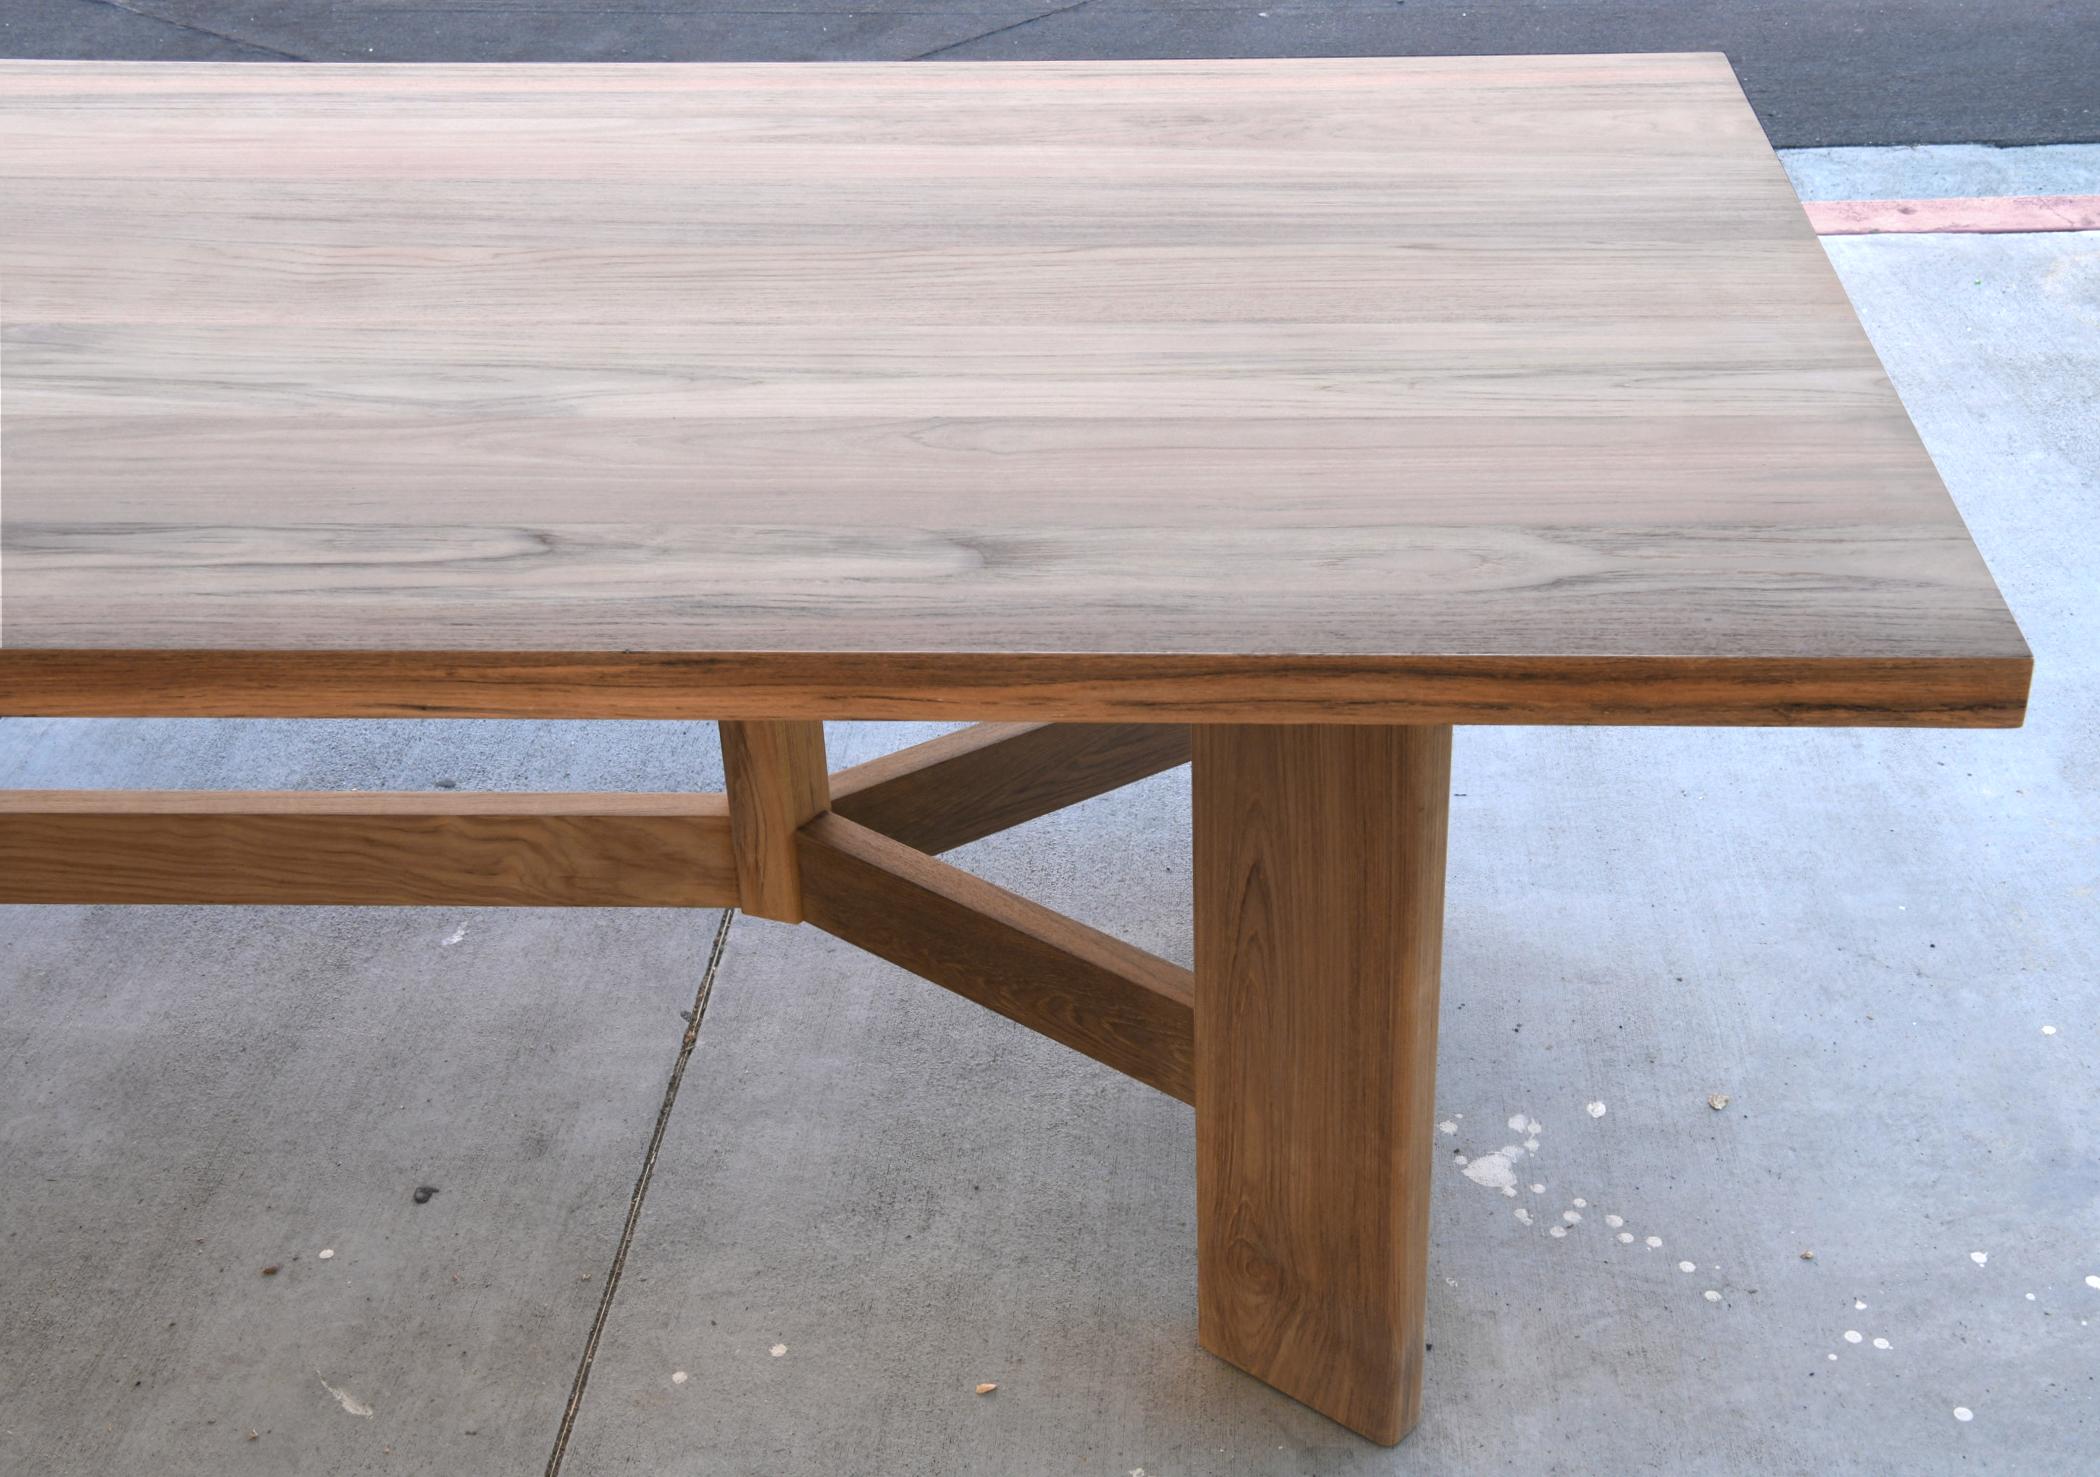 Hand-Crafted Lia Dining Table Made from Teak (indoor or outdoor) For Sale